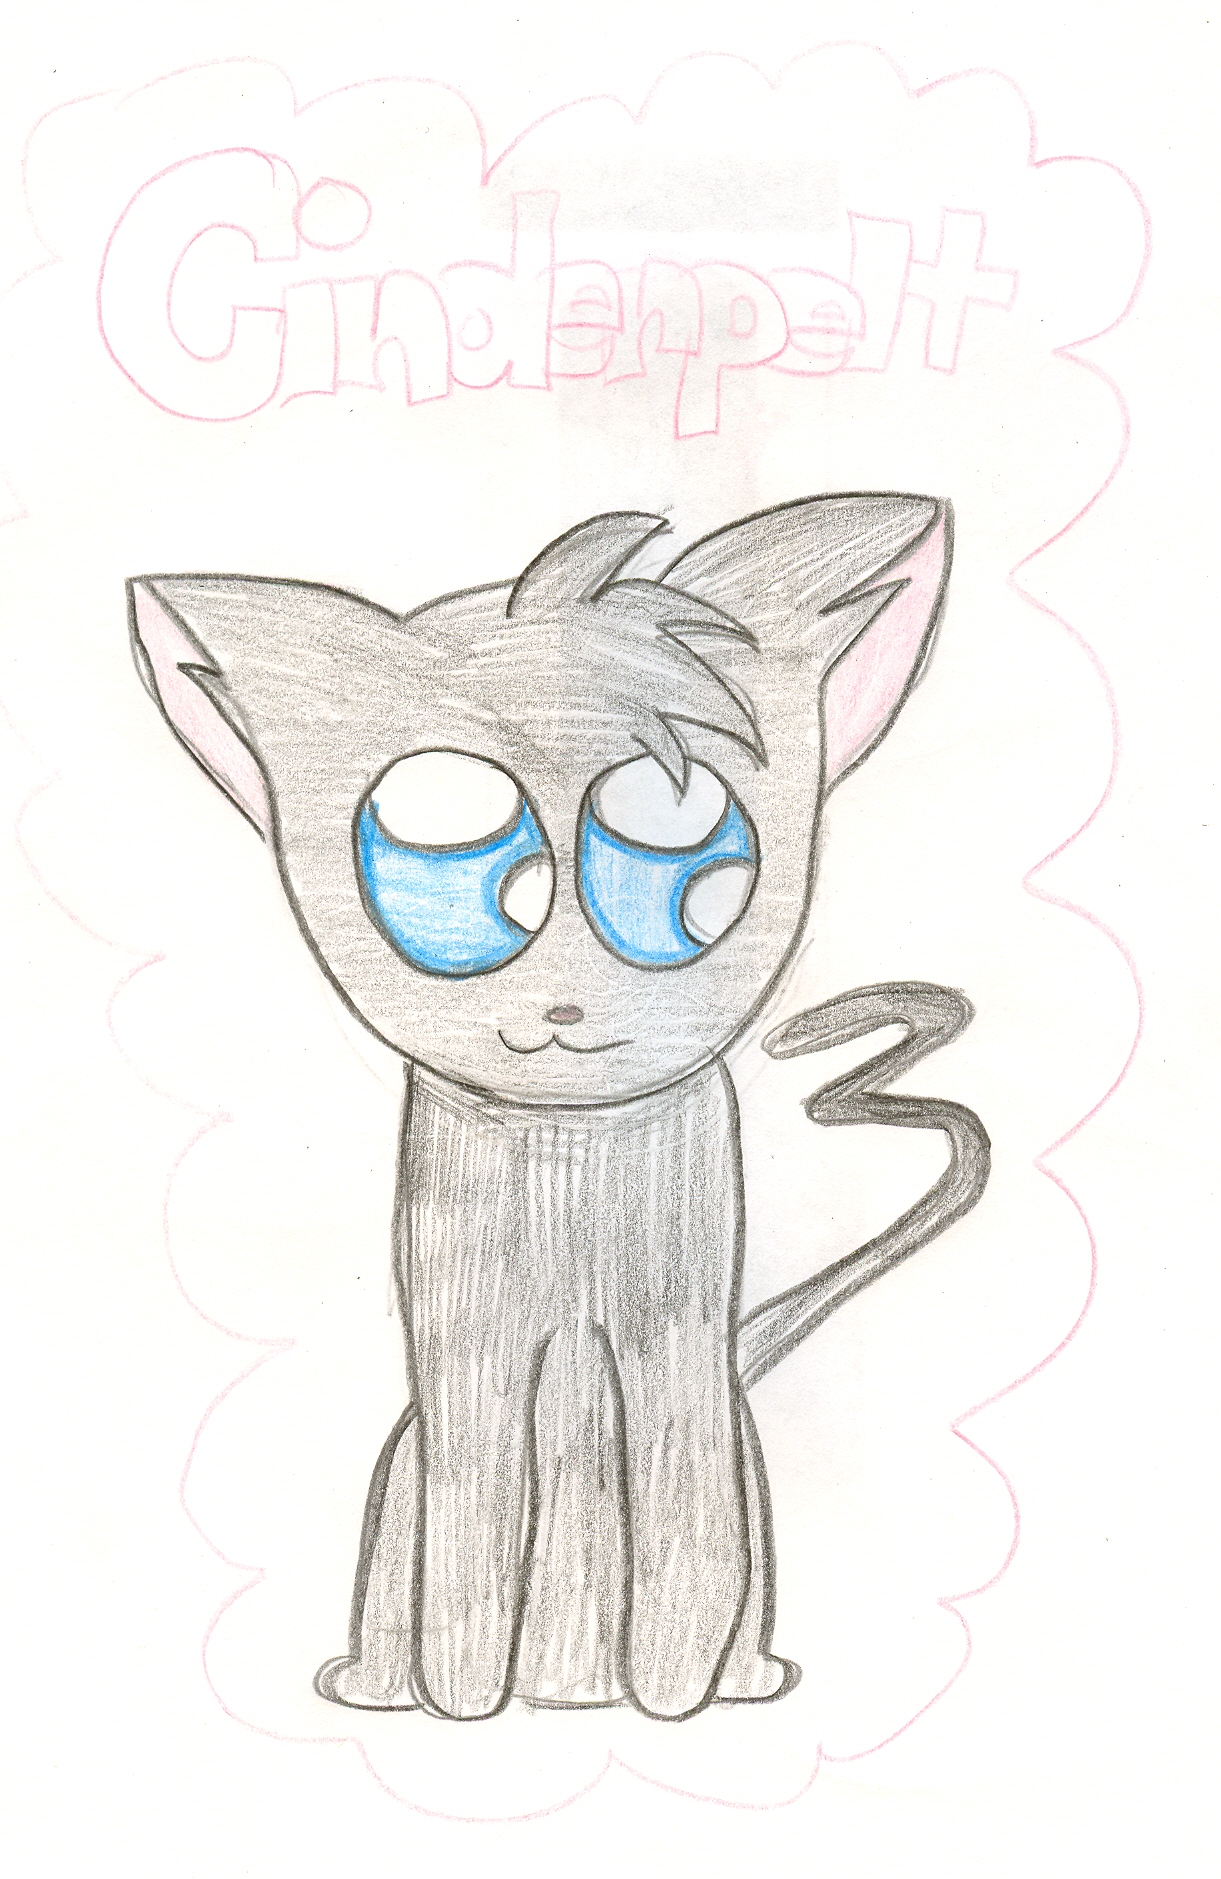 Cinderpelt by dianne982161